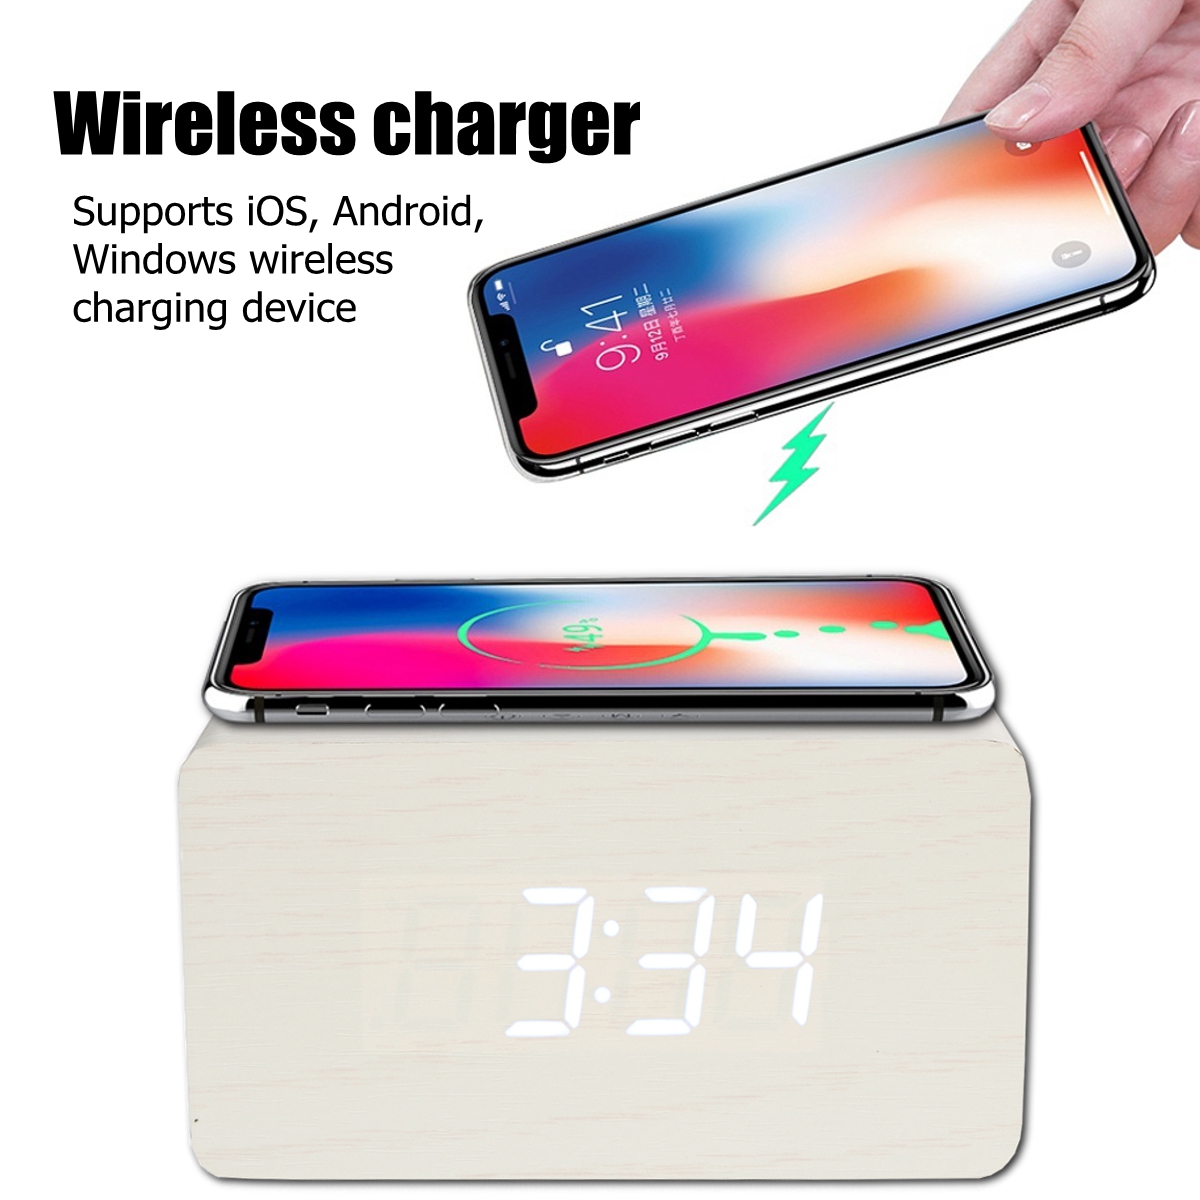 Digital-Thermometer-LED-Desk-Alarm-Clock-With--Wireless-Charger-For-Phone-1587803-3